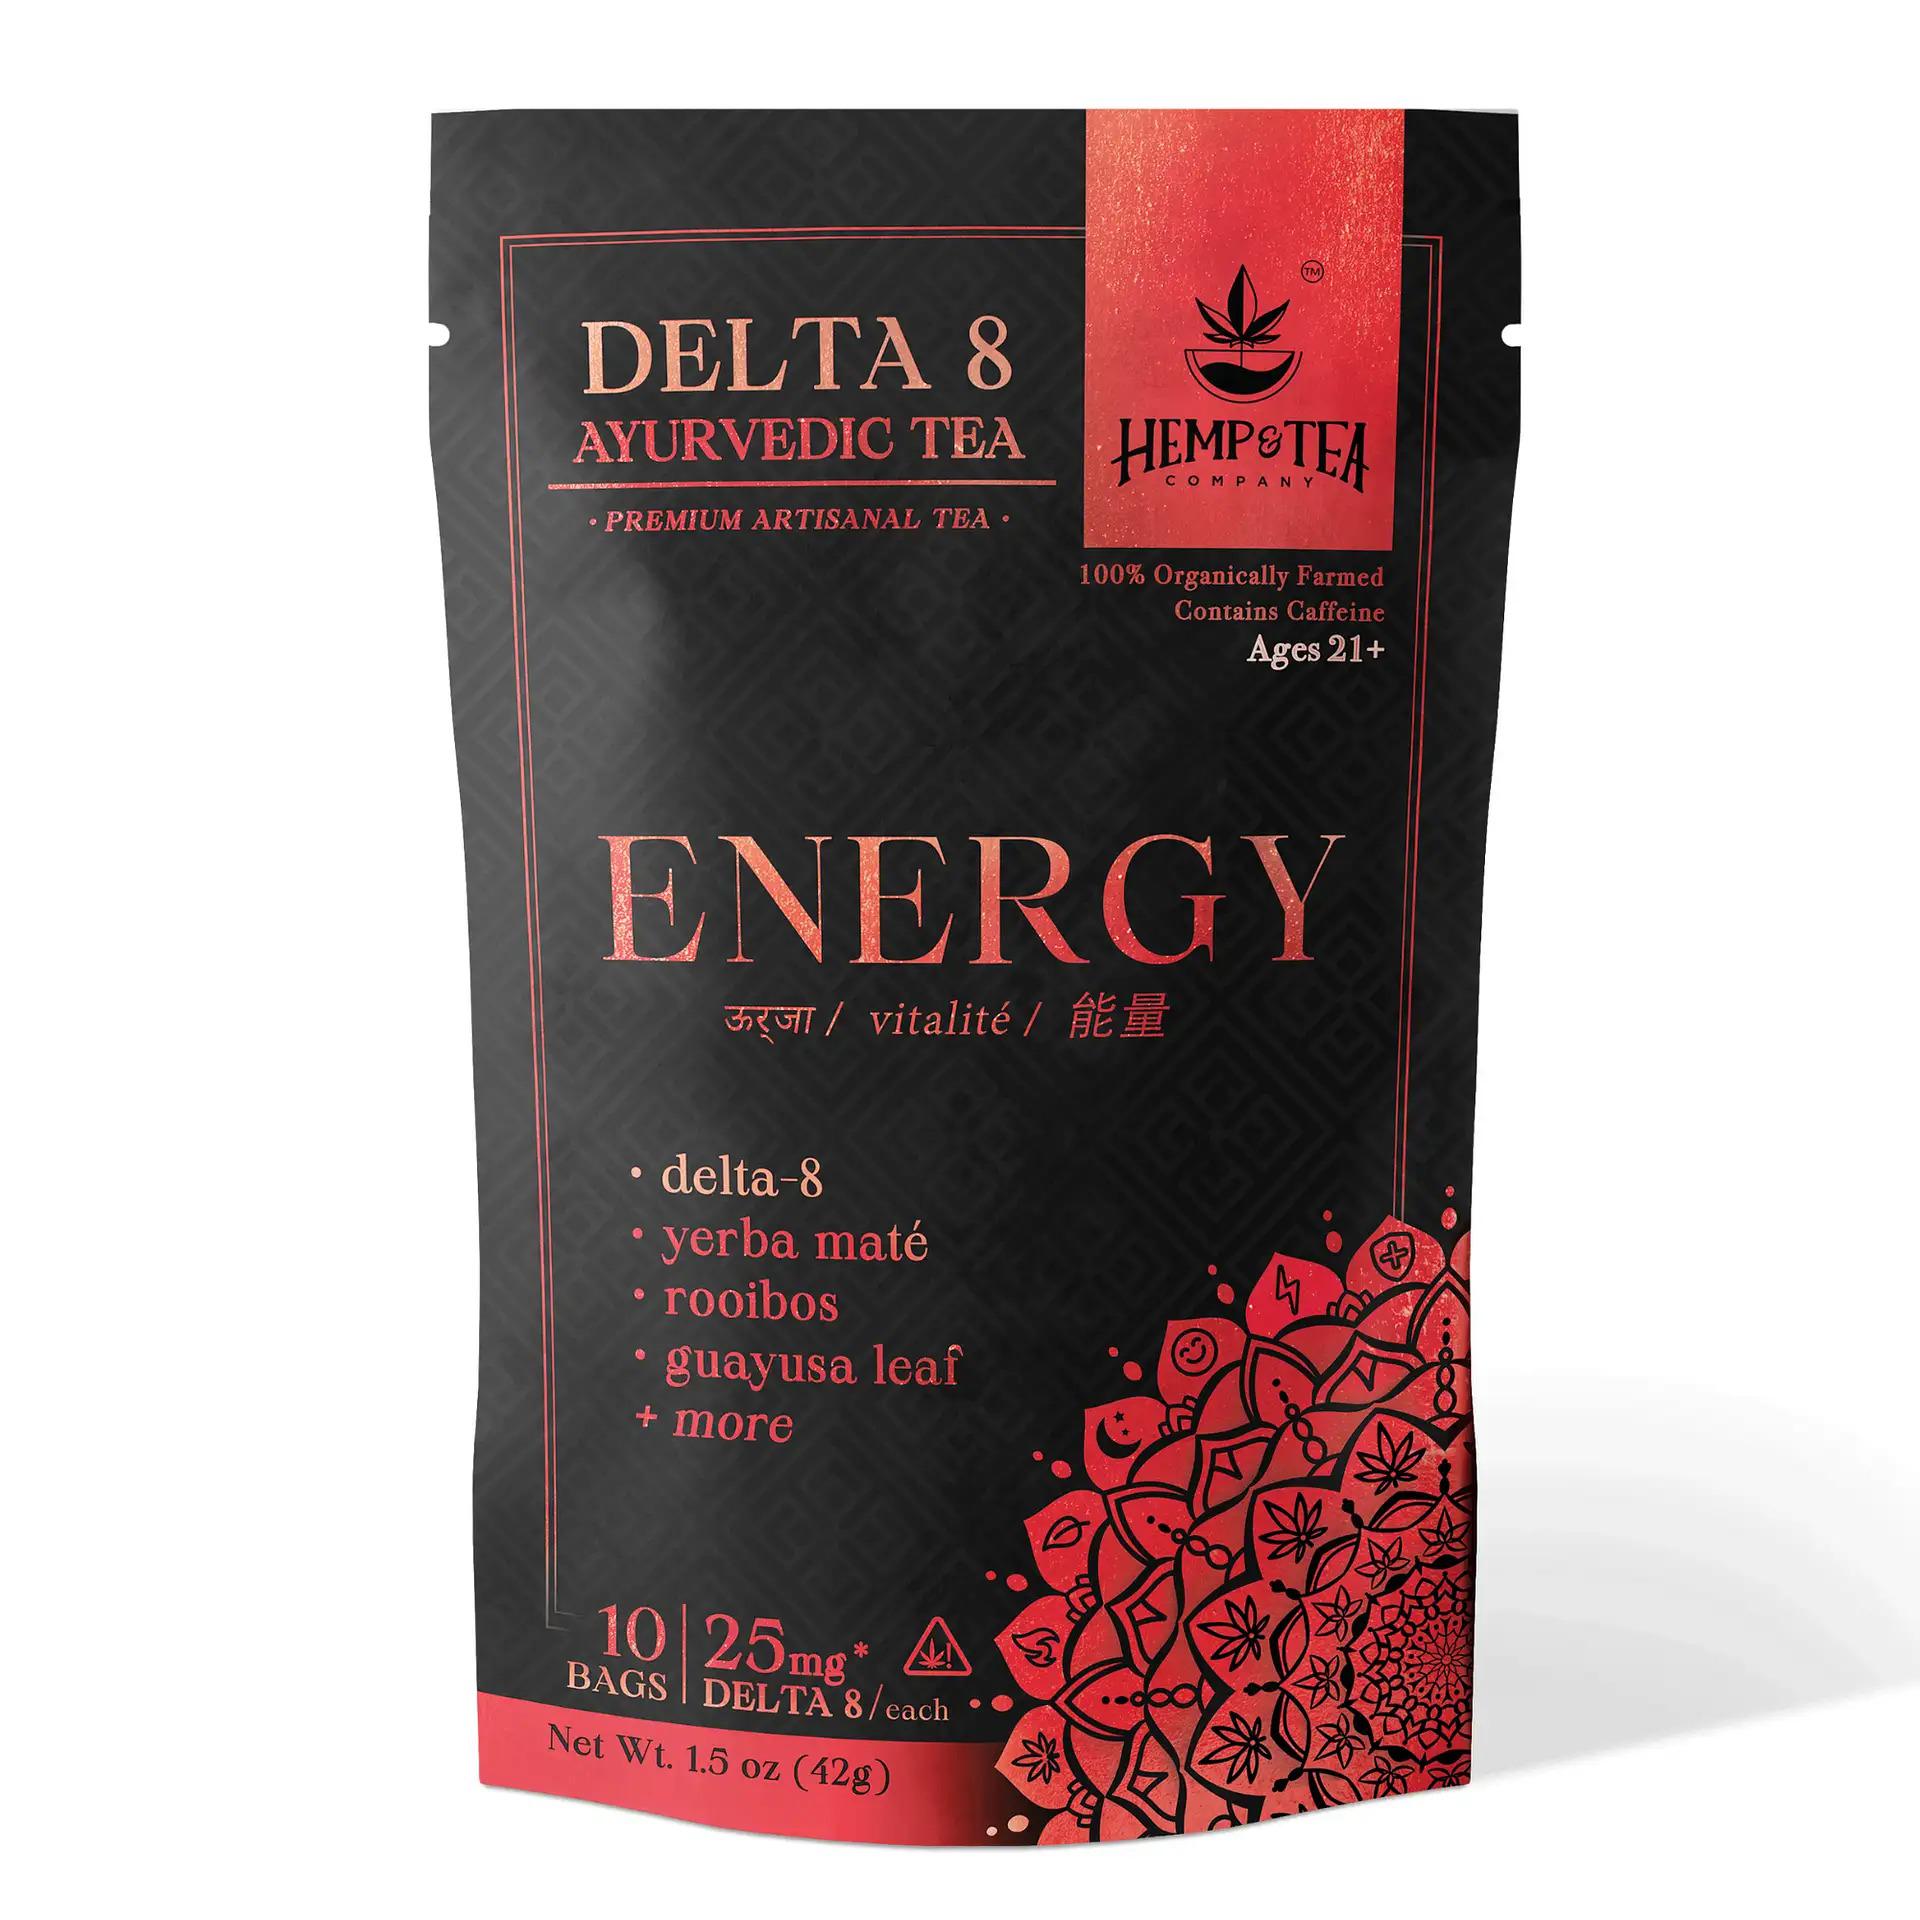 Bring vitality to your spirit with our hand-crafted Delta 8 Tea.

Our Energy blend is designed with water soluble Delta 8, which is 4x more bioavailable than other forms. Alongside herbs that have been used for centuries to restore fatigue and deliver natural energy, our blend contains Gotu Kola leaf, for soothing anxiety and allowing for a more grounded energy boost.

Each tea bag contains 25mg hand-dosed Delta 8, providing consistent effects from serving to serving. Each package contains 10 tea bags. Contains caffeine.